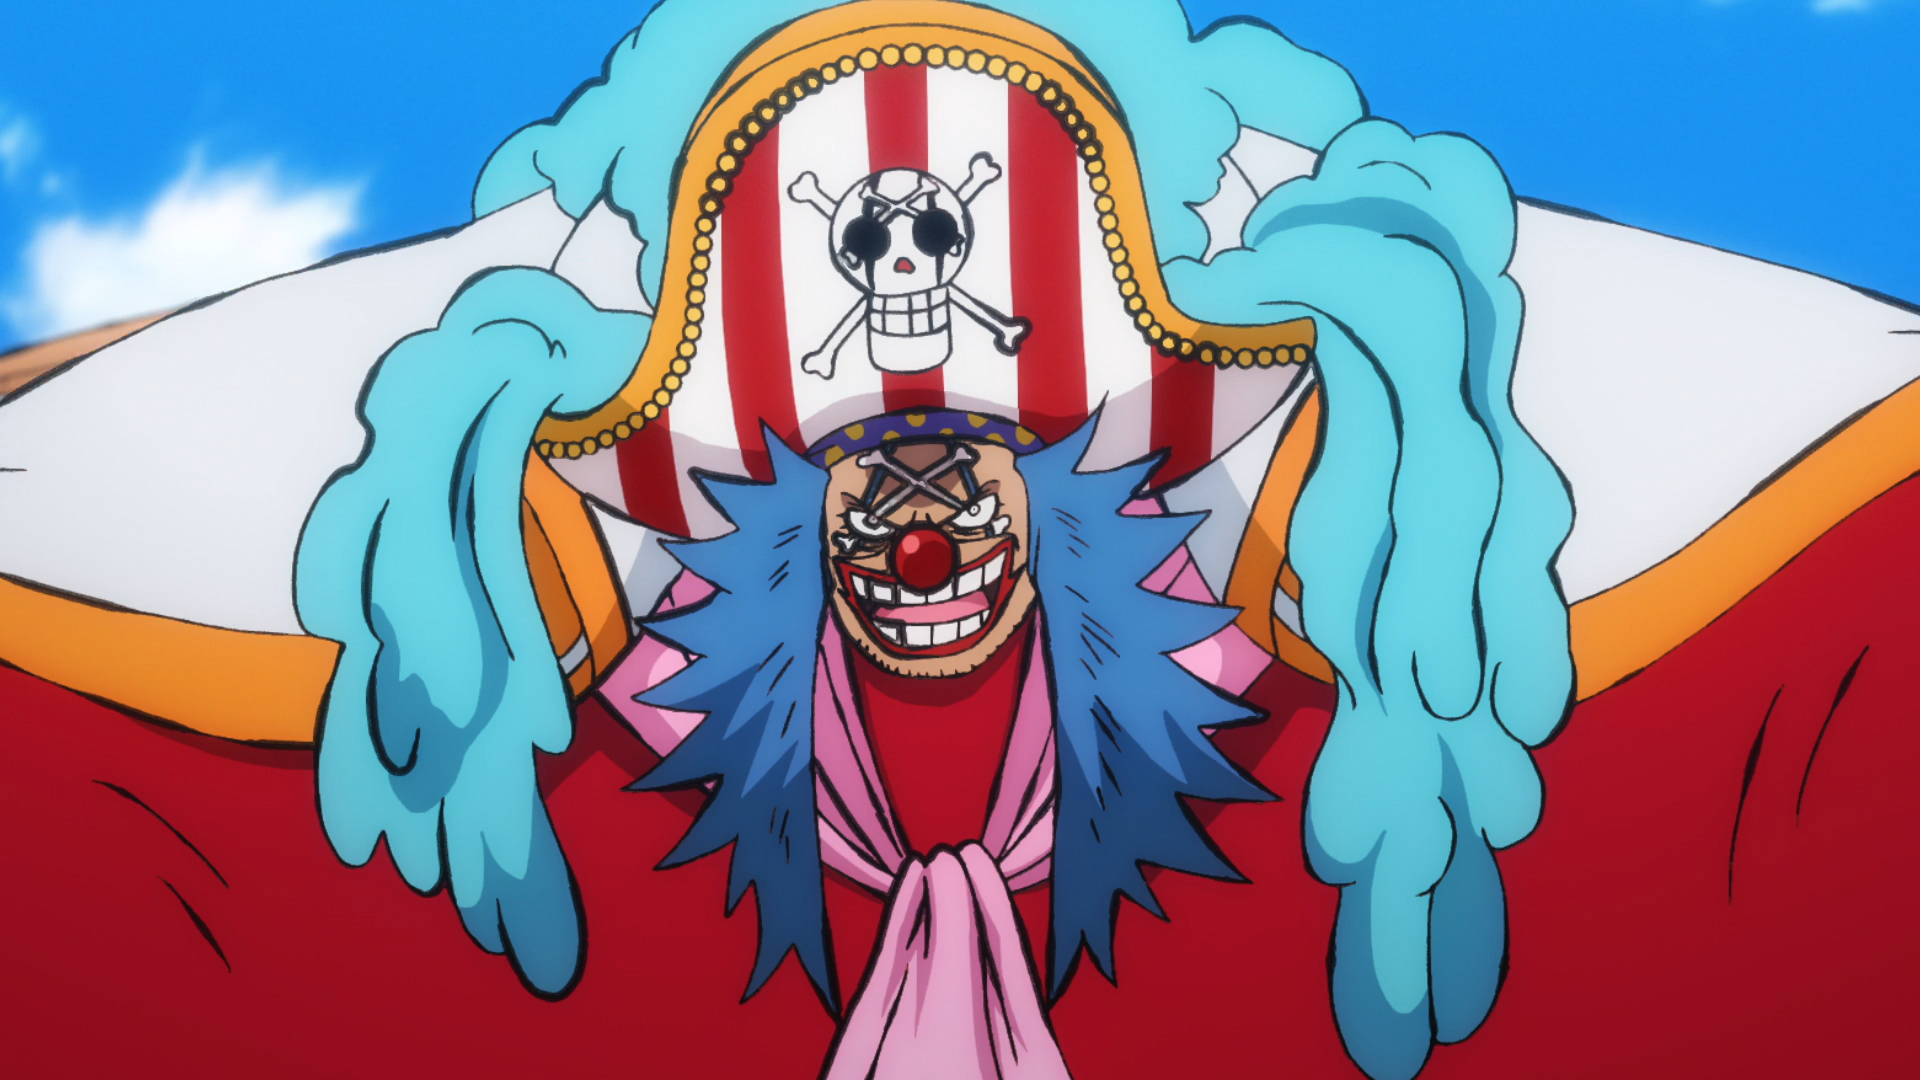 http://img2.wikia.nocookie.net/__cb20140915112745/onepiece/images/f/f7/Buggy_Anime_Post_Timeskip_Infobox.png?width=600